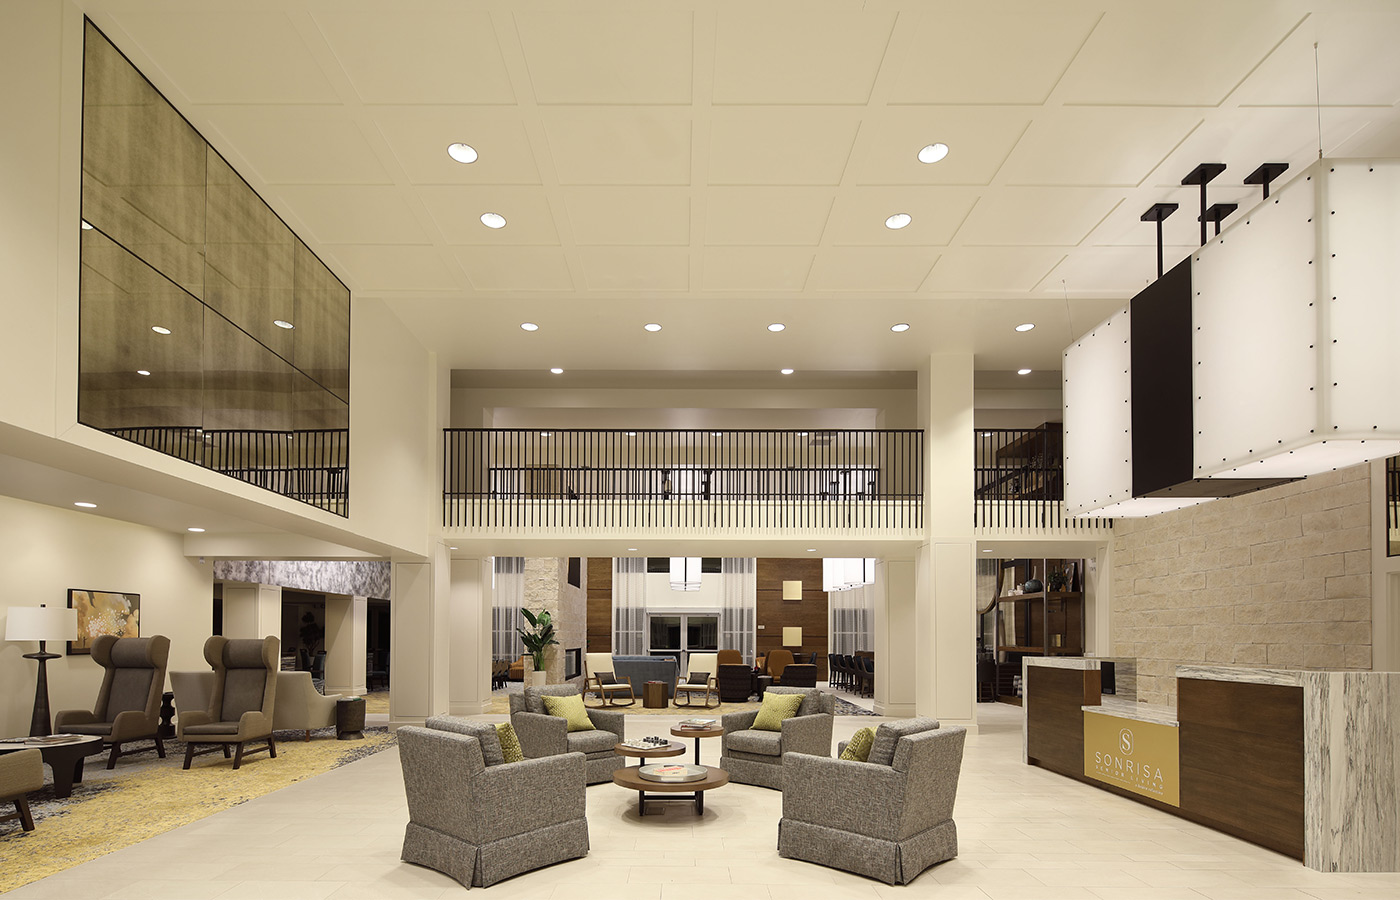 A large lobby area with seating.